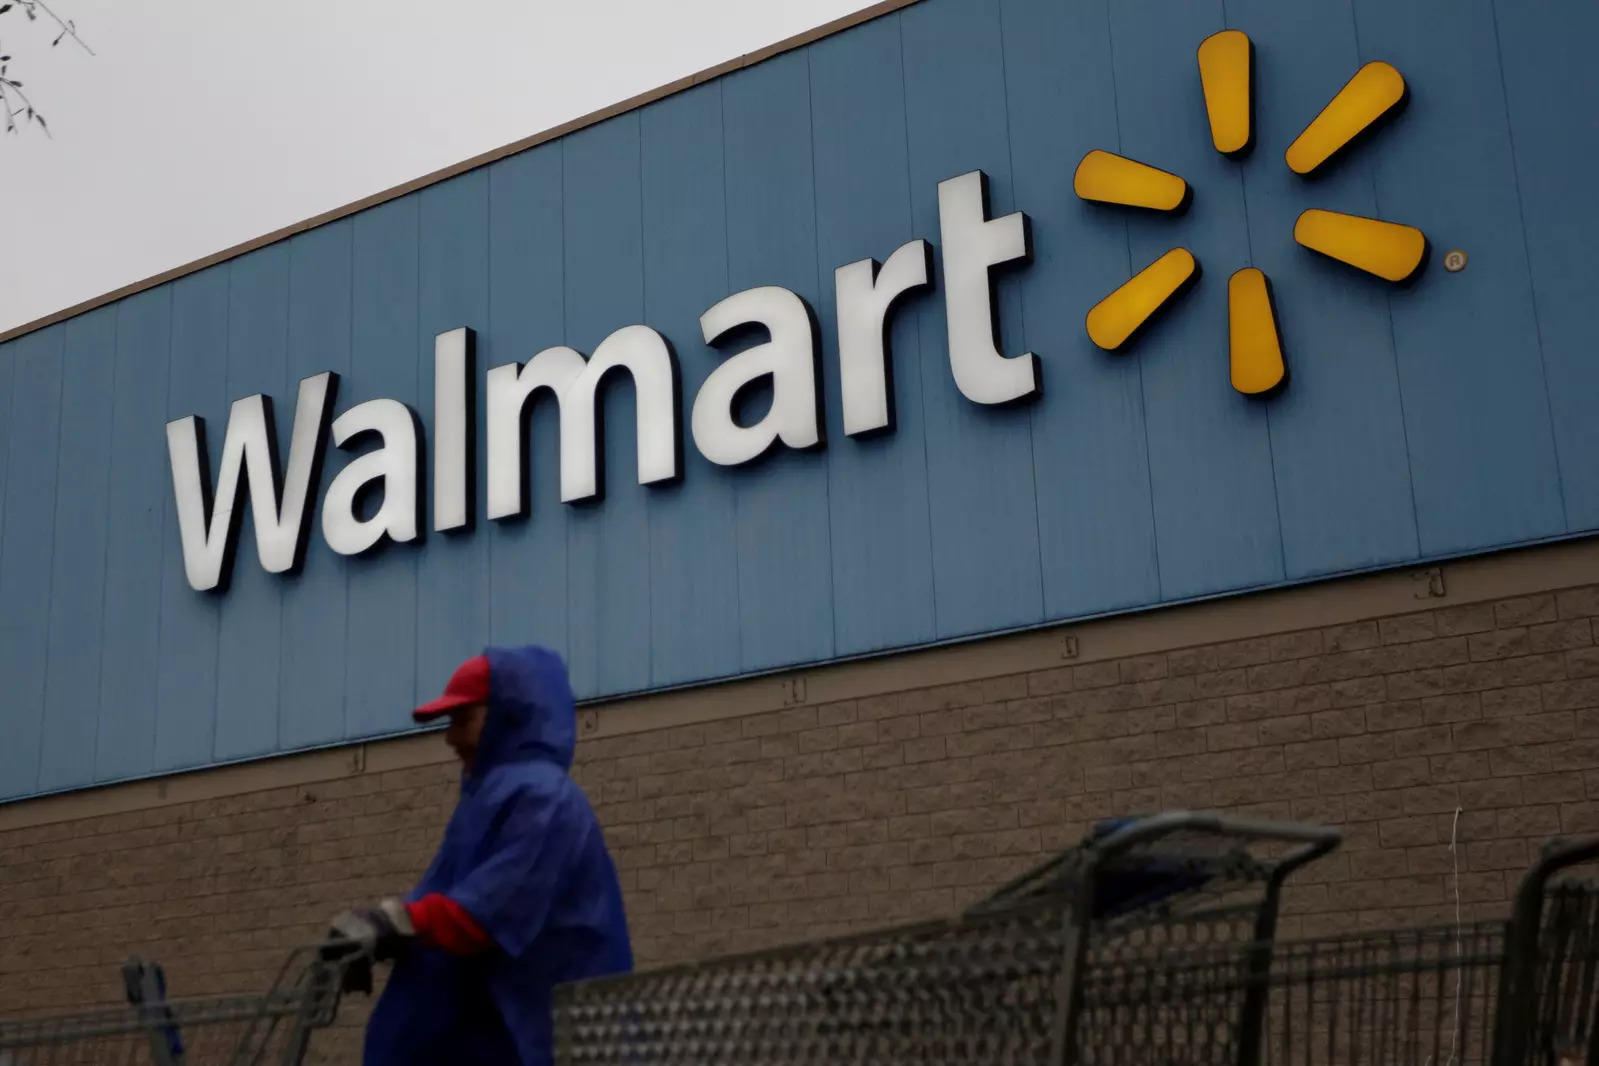 FILE PHOTO: Employee arranges shopping carts in front of the logo of Walmart outside a store in Monterrey